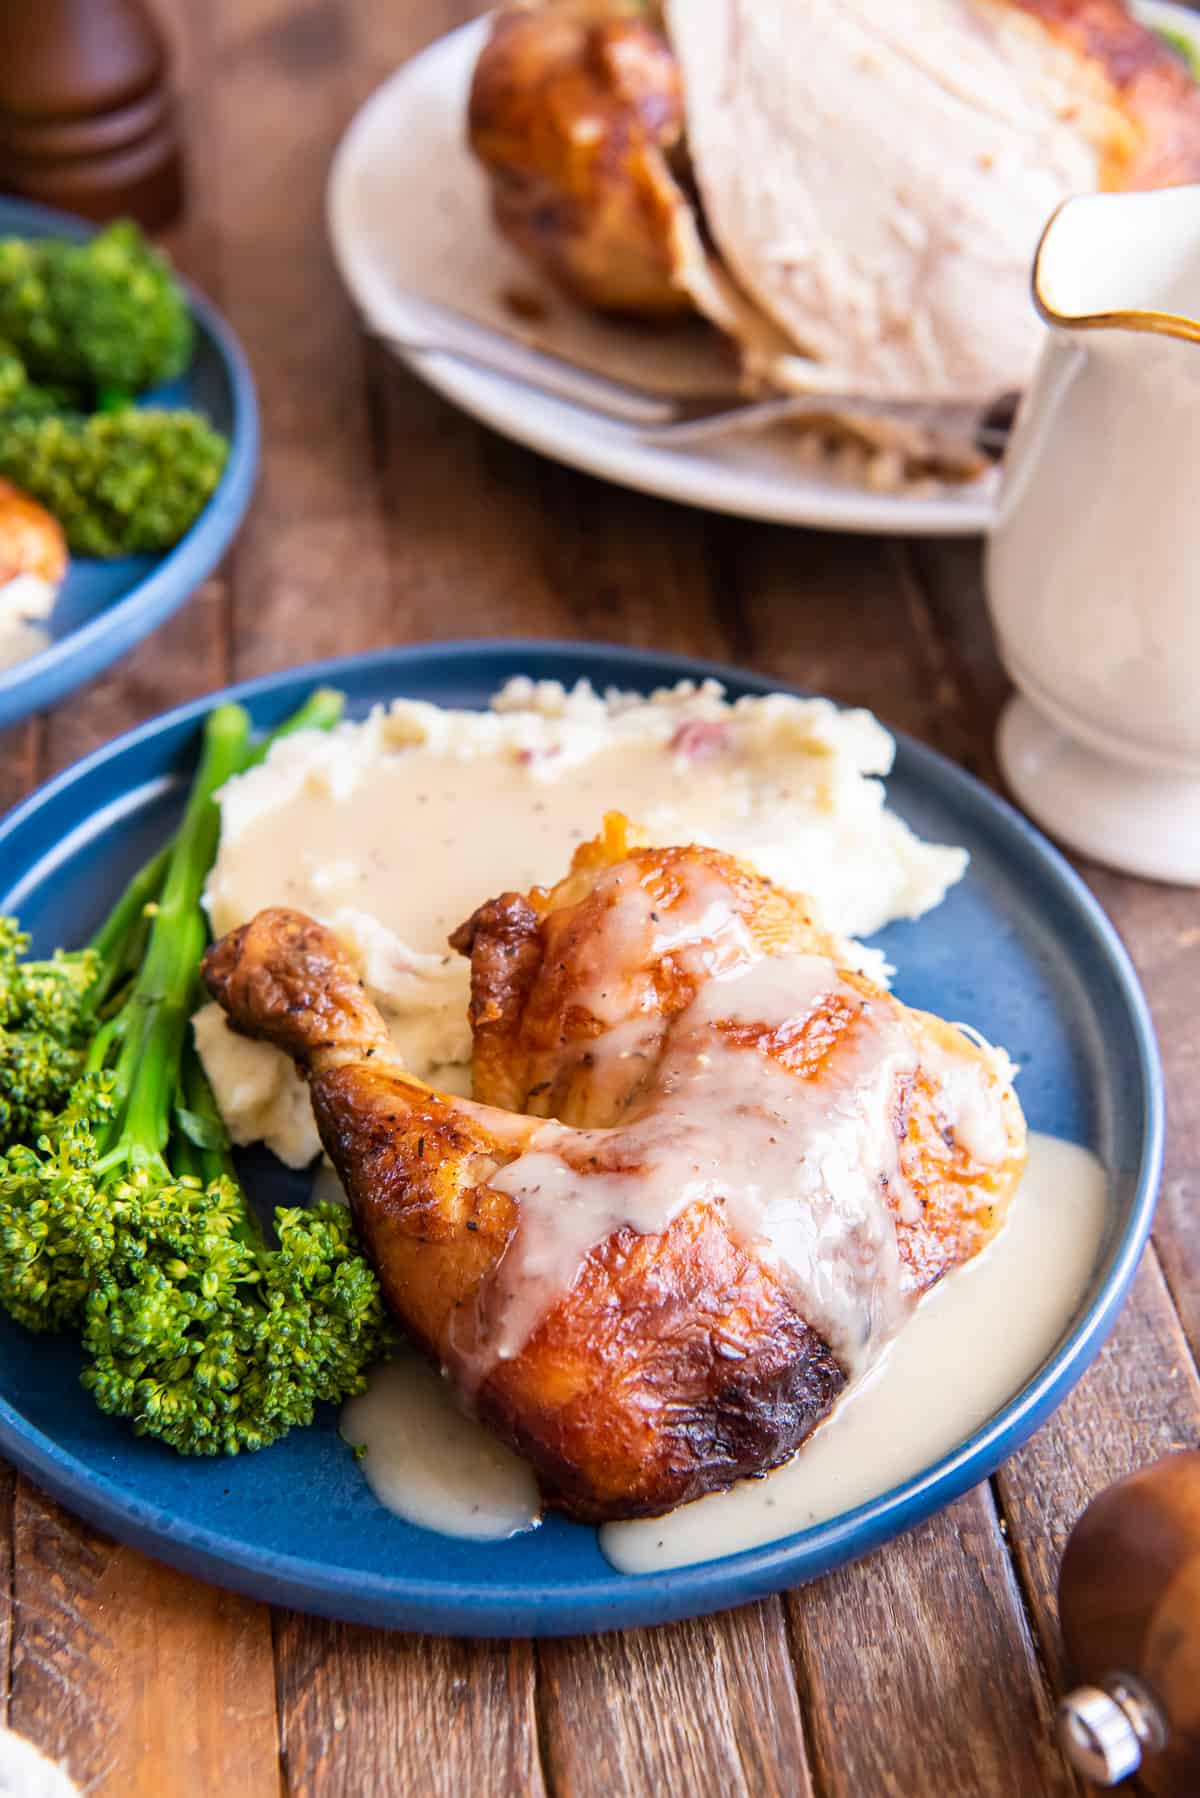 Pieces of rotisserie chicken topped with gravy on a blue plate with mashed potatoes and broccolini.